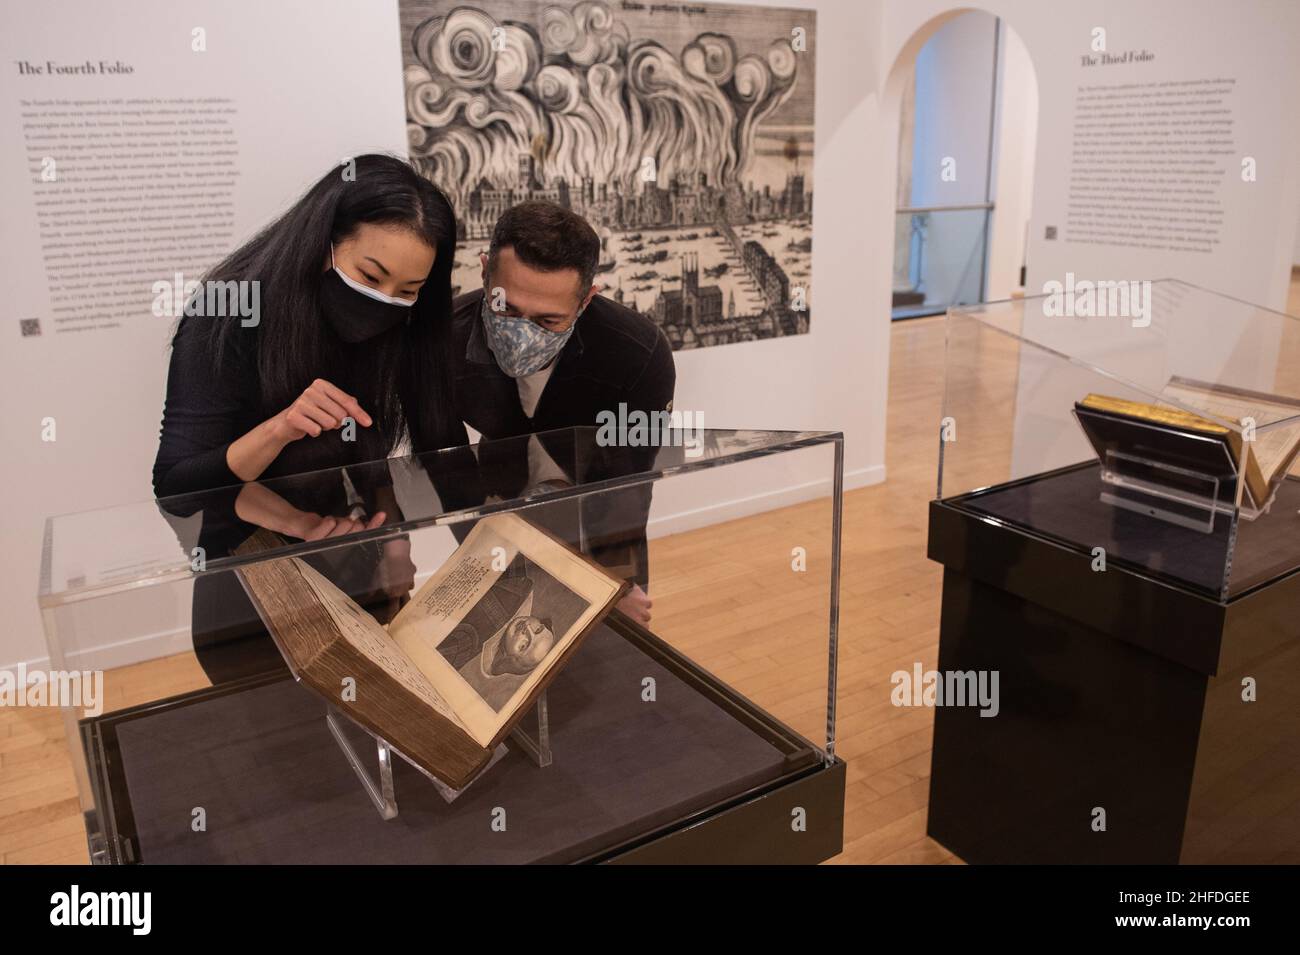 Vancouver, British Columbia, Canada. 15th Jan, 2022. SINAE PARK of Vancouver and ALEXANDER MOULDOVAN, visiting from Florida, admire William Shakespeare's Fourth Folio at the Vancouver Art Gallery Jan. 15. The gallery is displaying all four folios until March 20, including an extremely rare complete first edition of the first, containing 36 of the writer's 38 known plays. The volume was recently acquired by the University of British Columbia through Christie's New York with funding by a consortium of donors from across North America, including the federal Department of Canadian Heritage Stock Photo